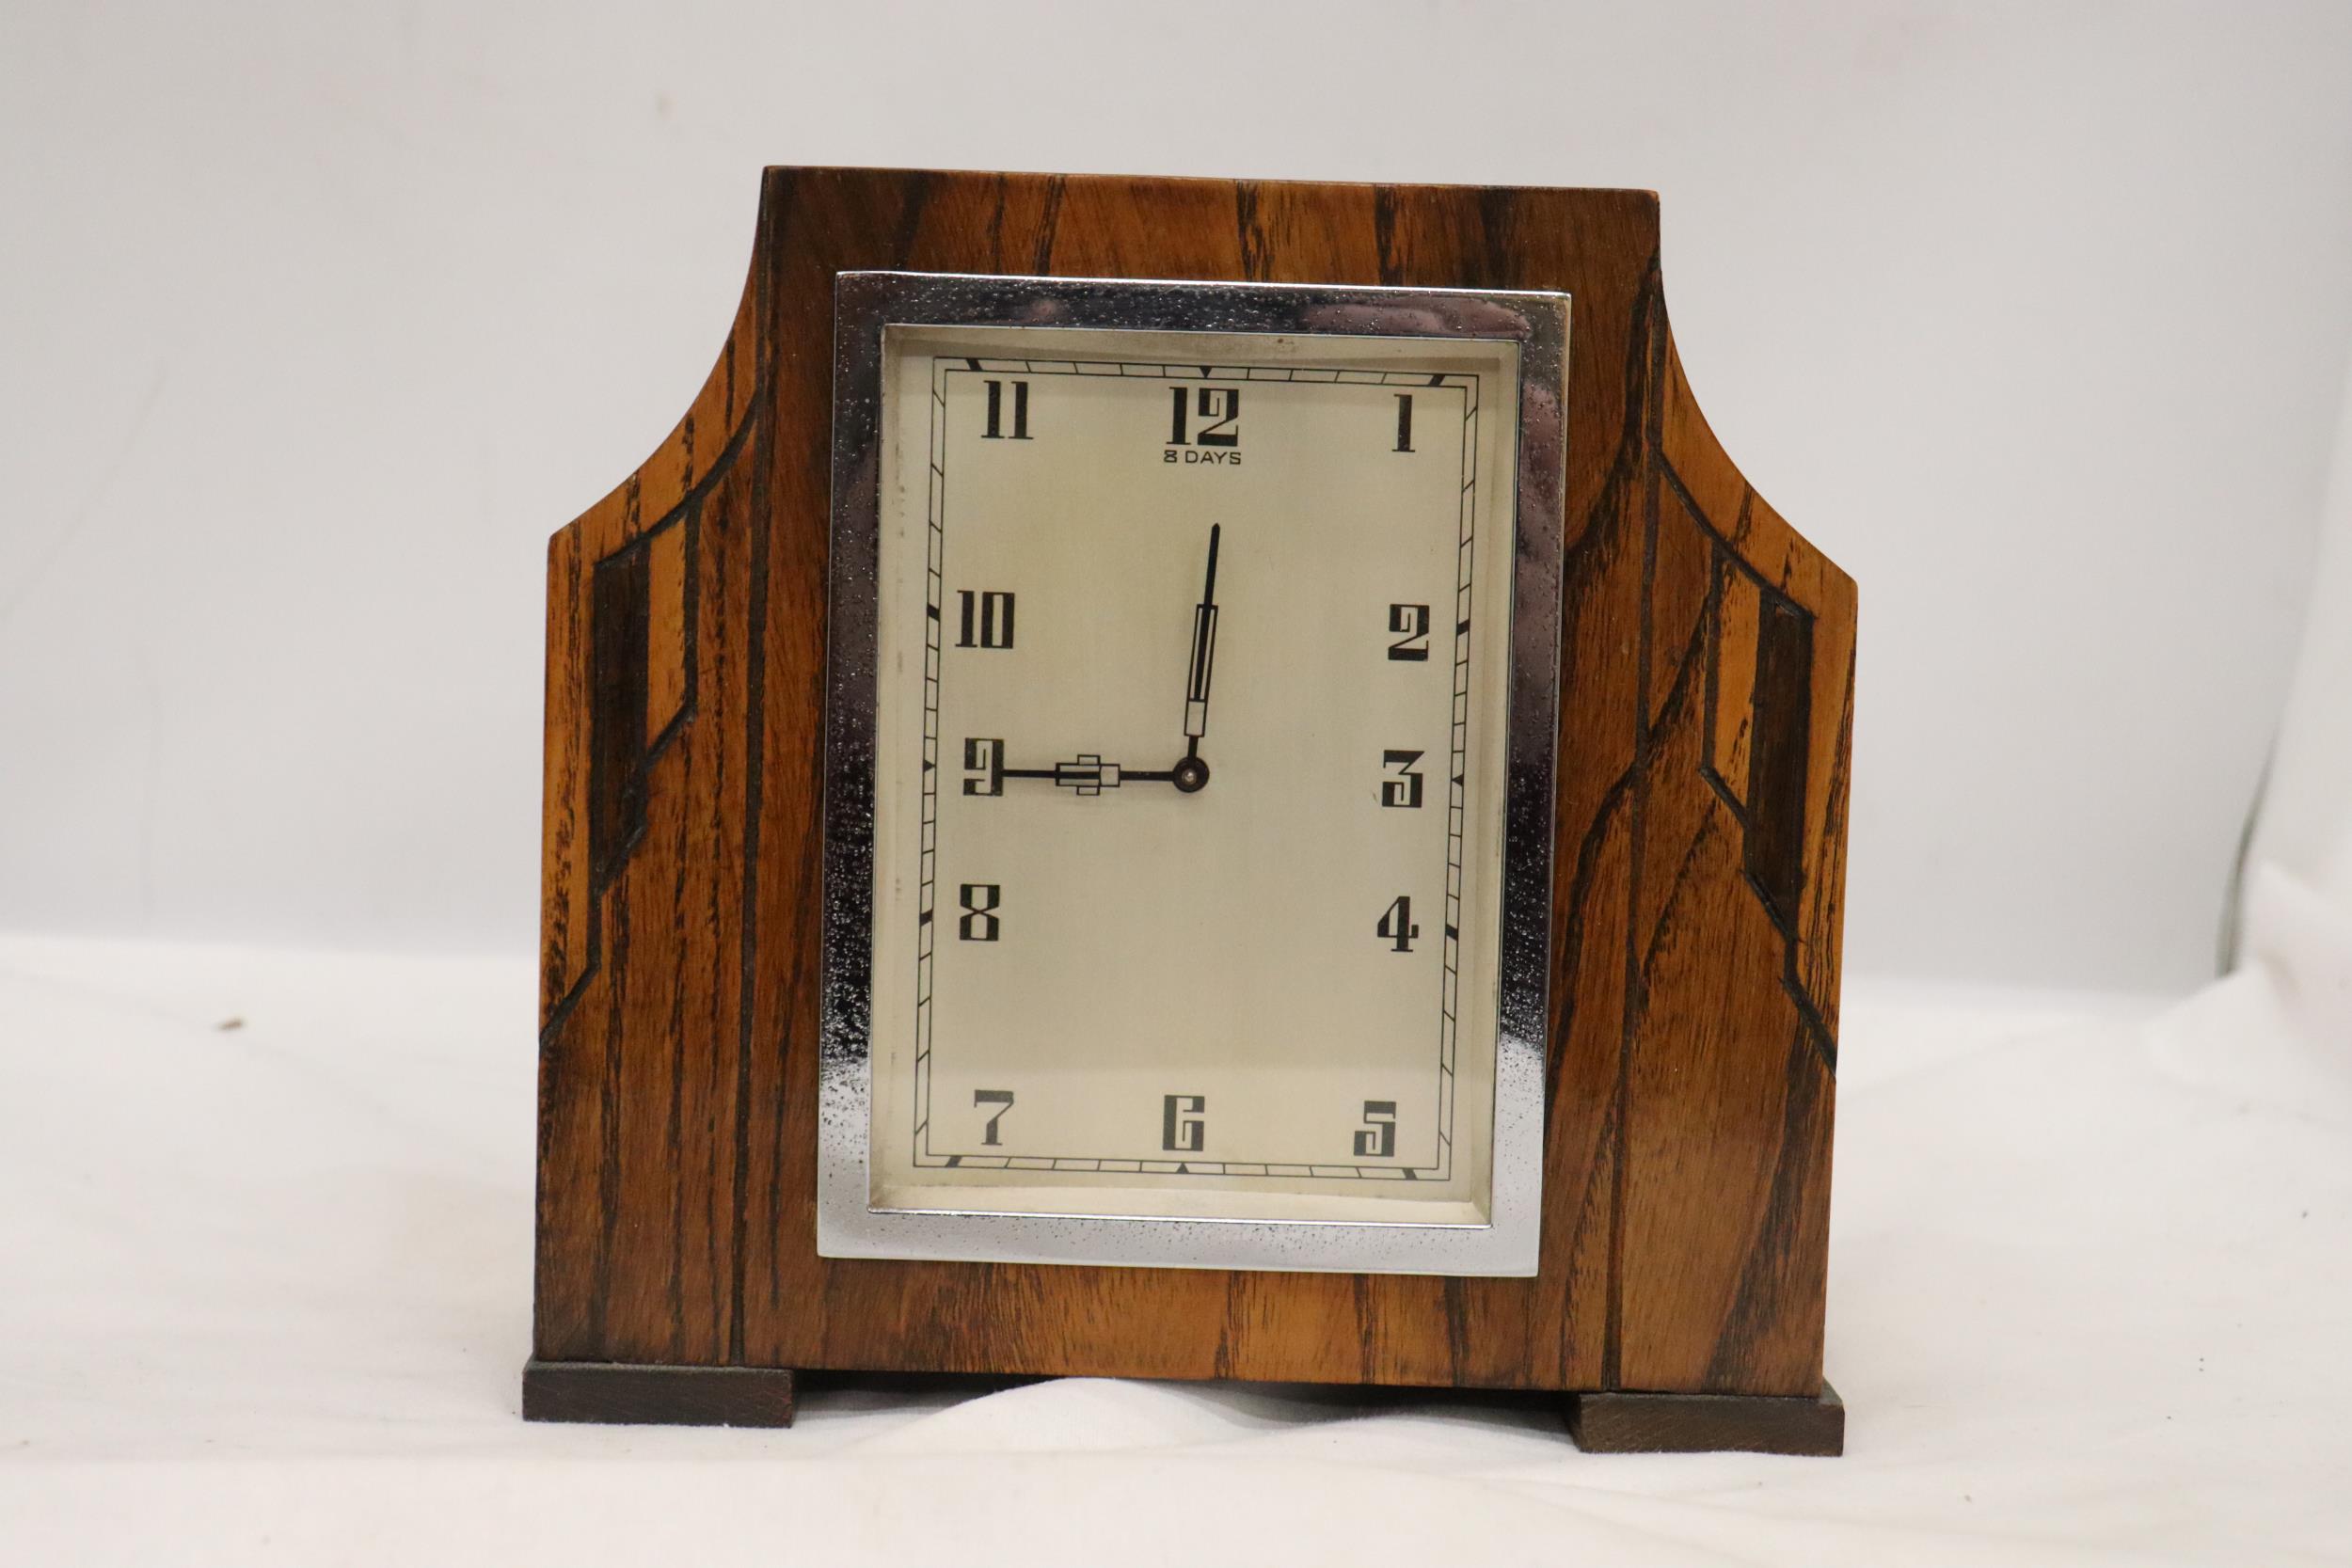 A DECO STYLE OAK 8 DAY MANTLE CLOCK WITH WIND UP MECHANISM SEEN WORKING BUT NO WARRANTY